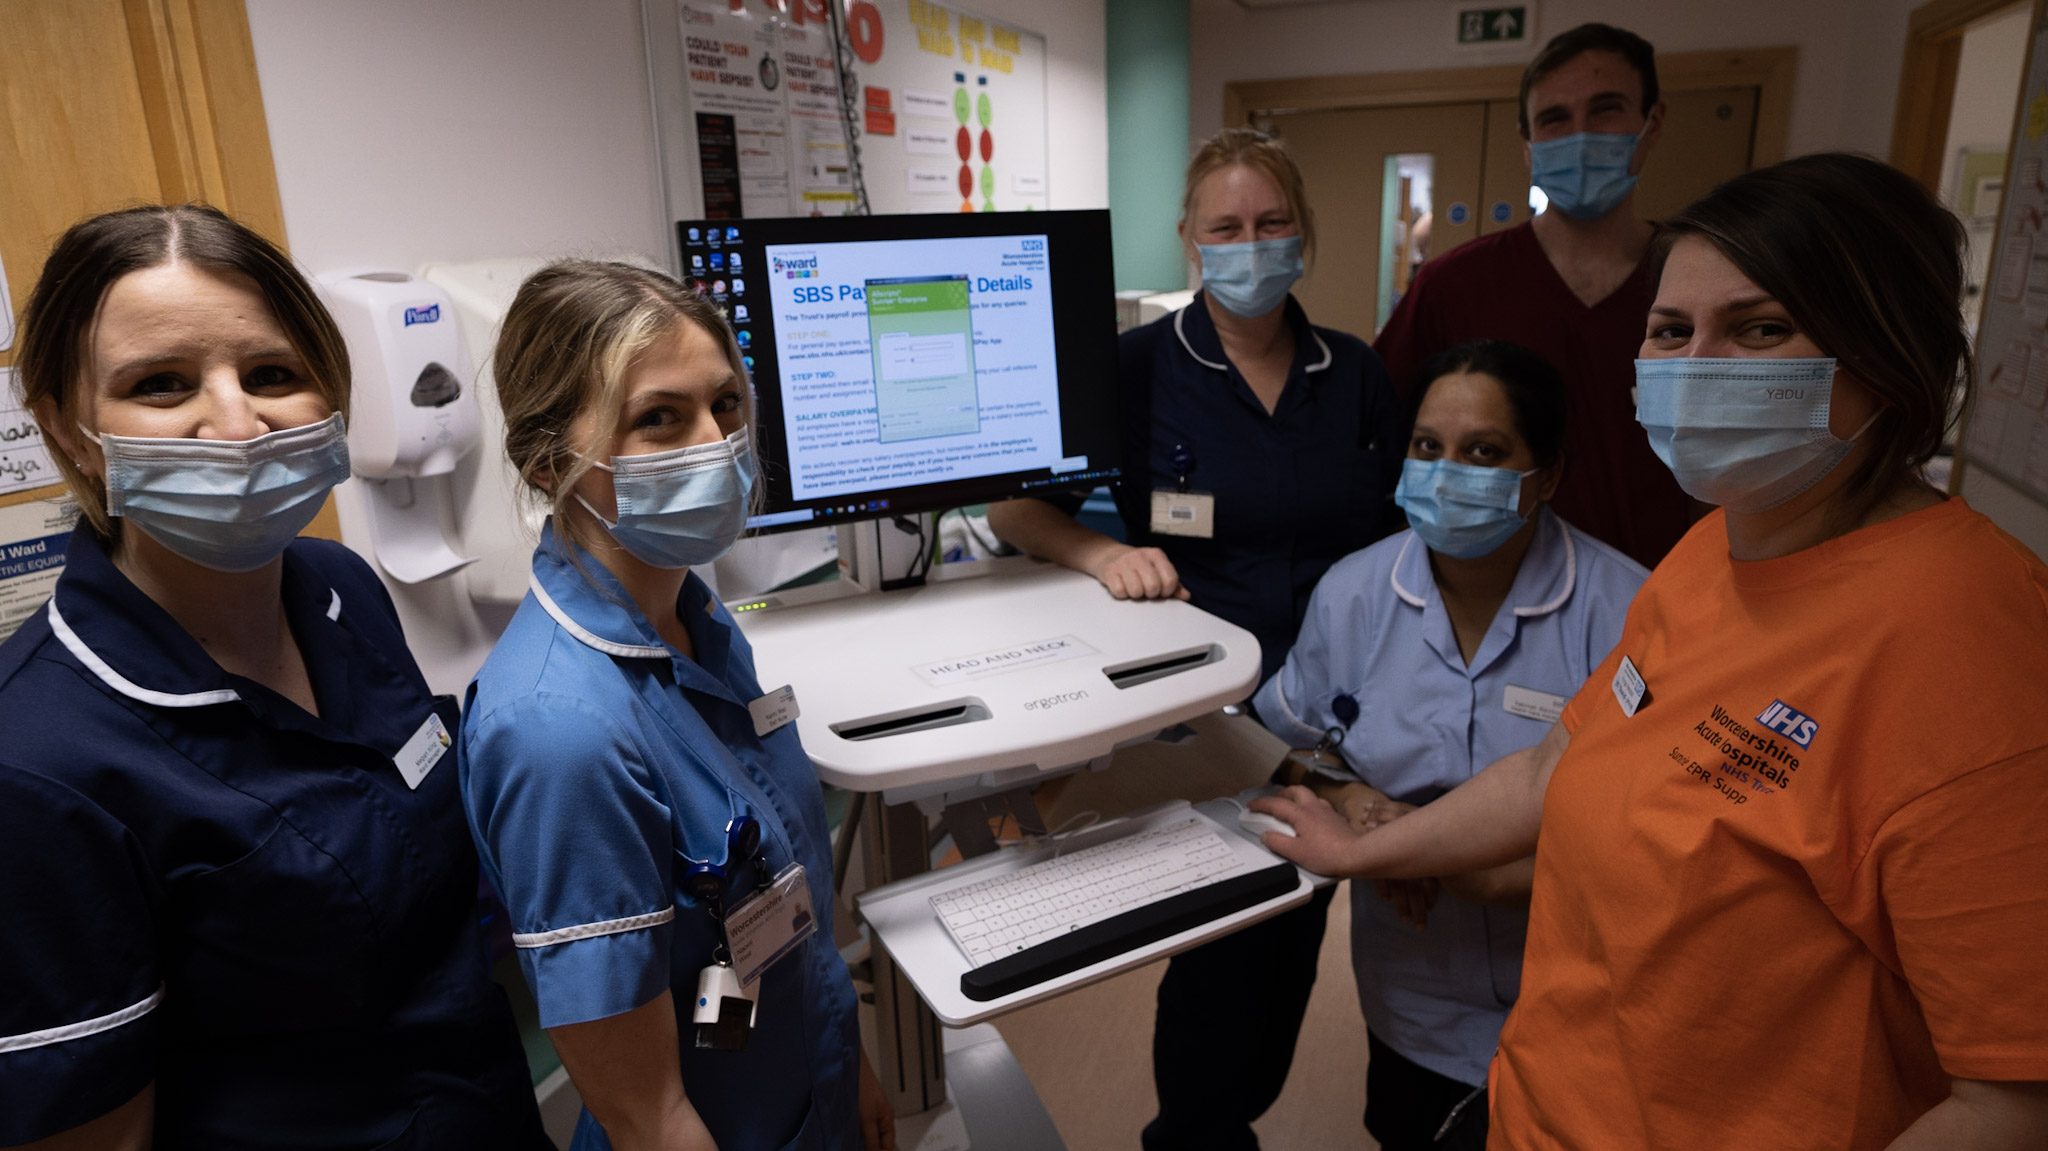 Worcestershire Acute Hospitals NHS Trust introduce one of the UK’s most advanced electronic patient record systems in its history